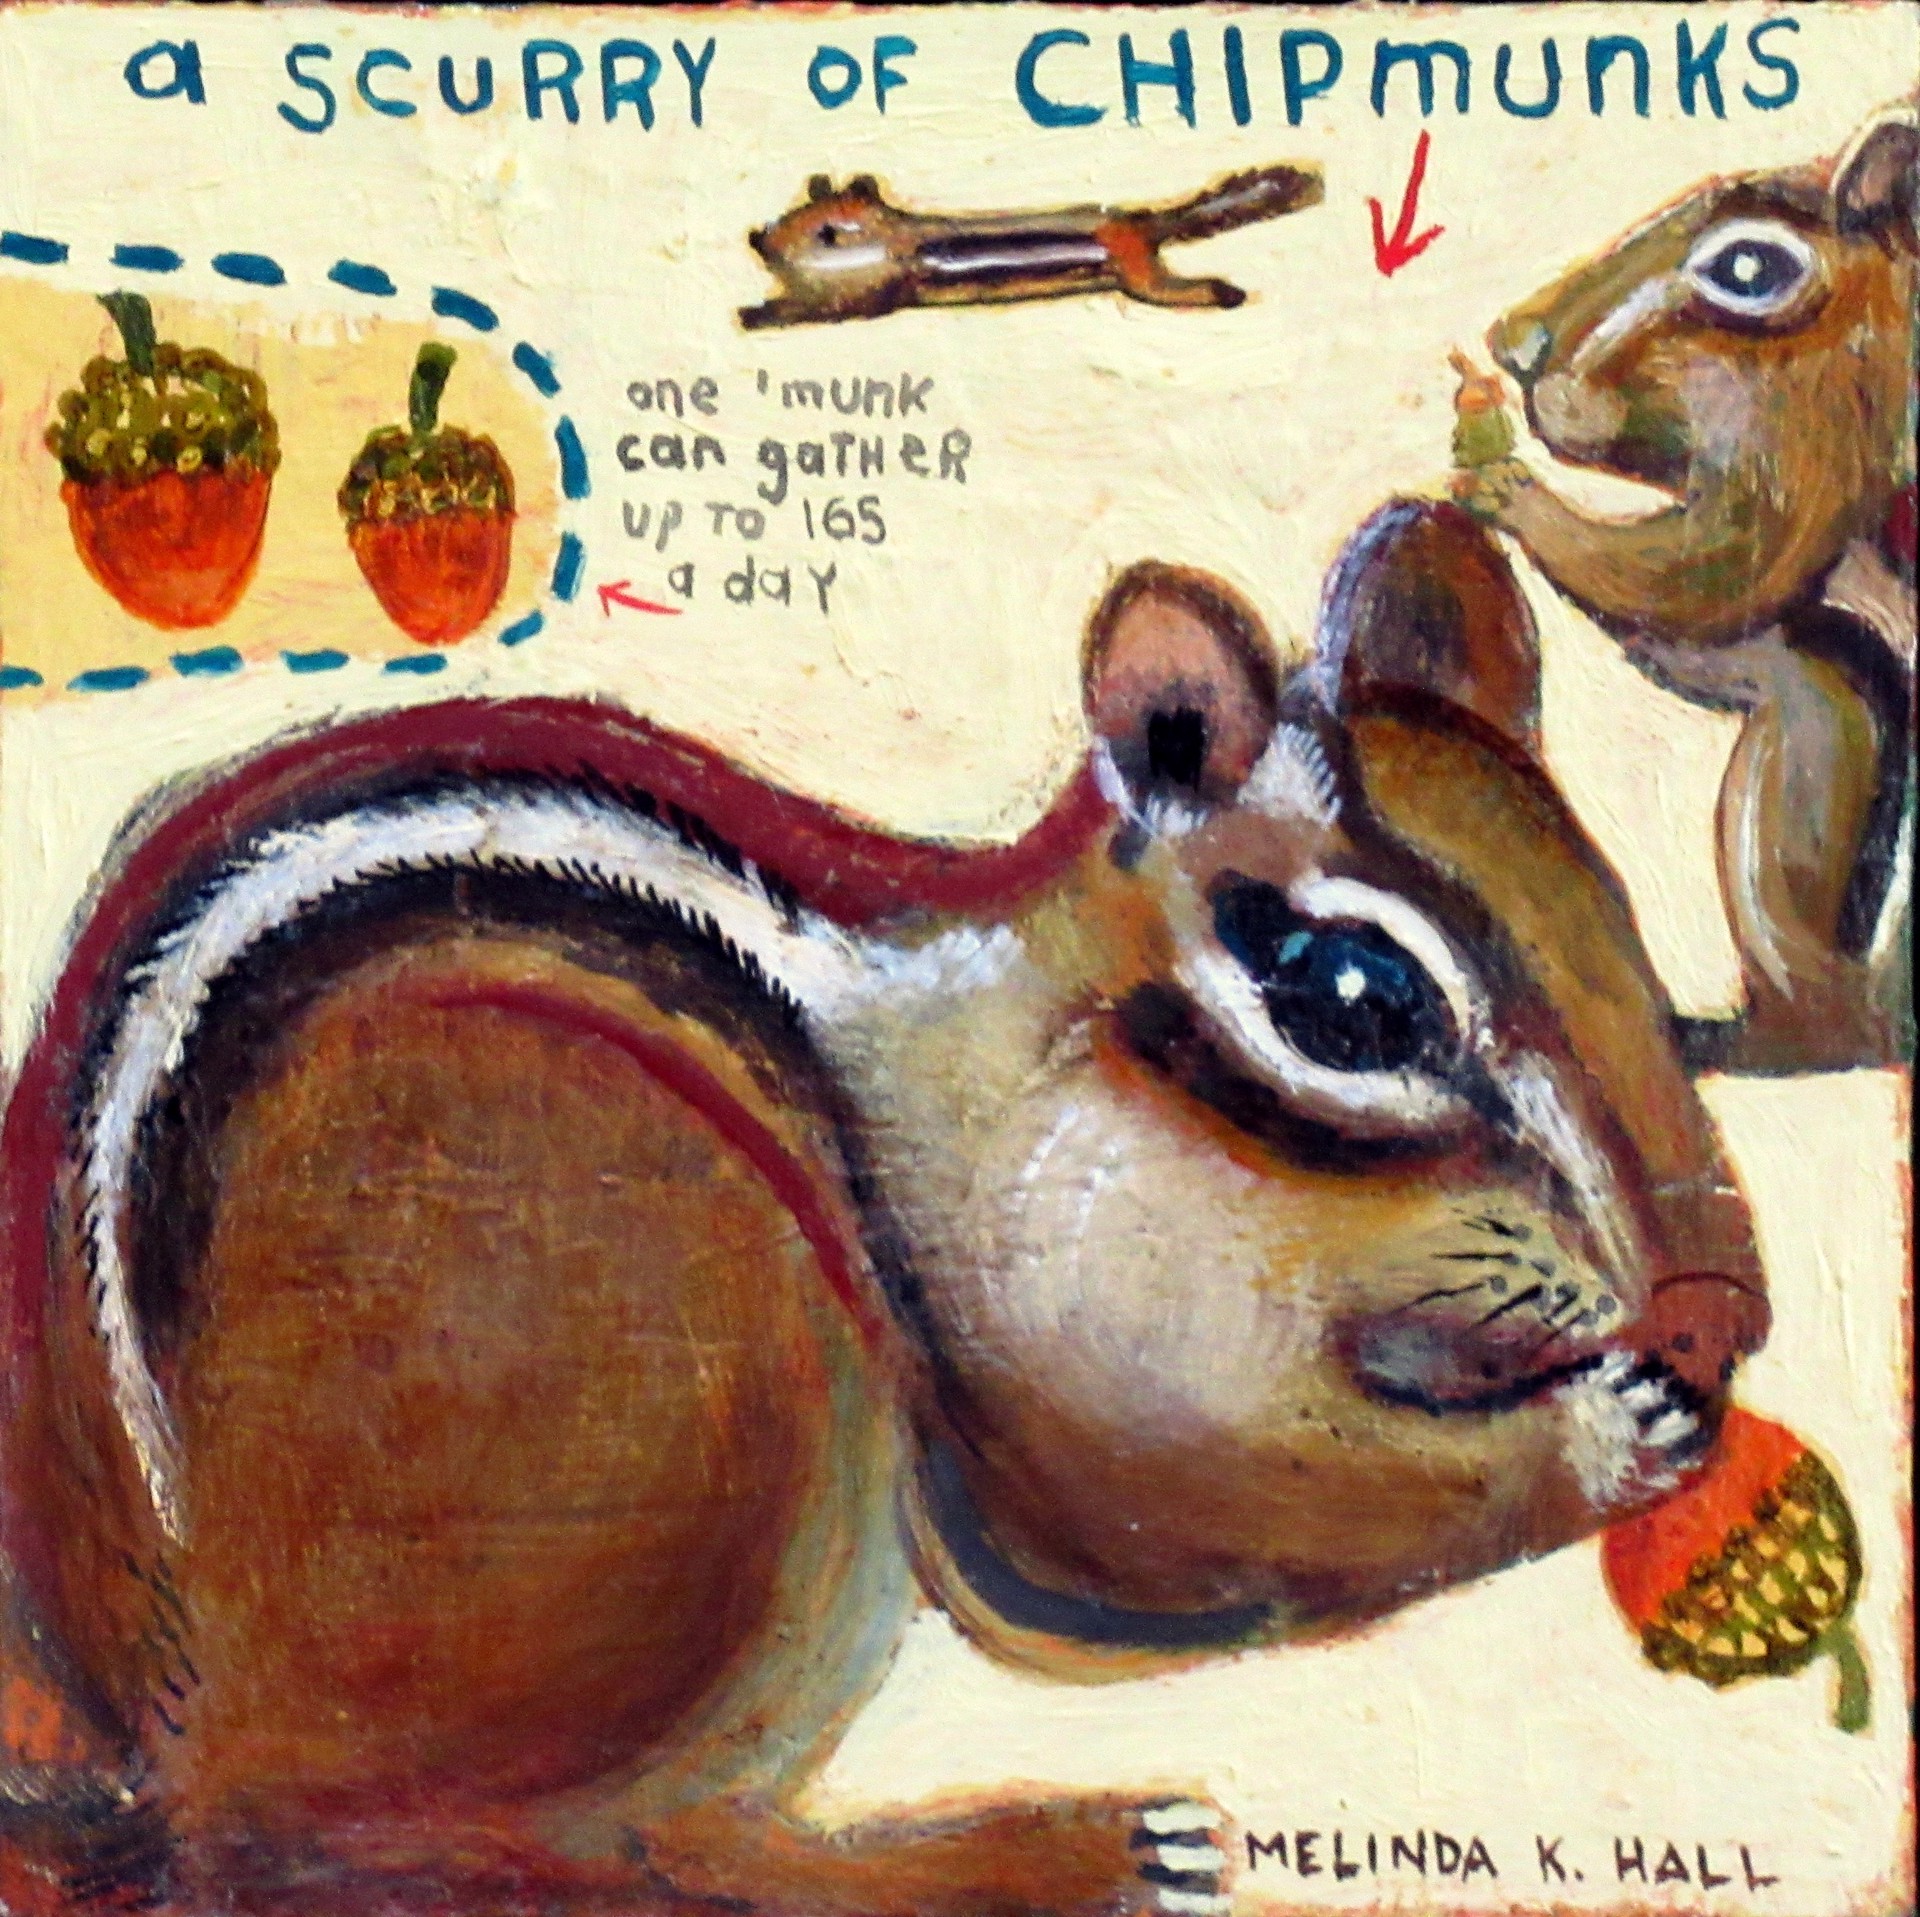 A Scurry of Chipmunks by Melinda K. Hall